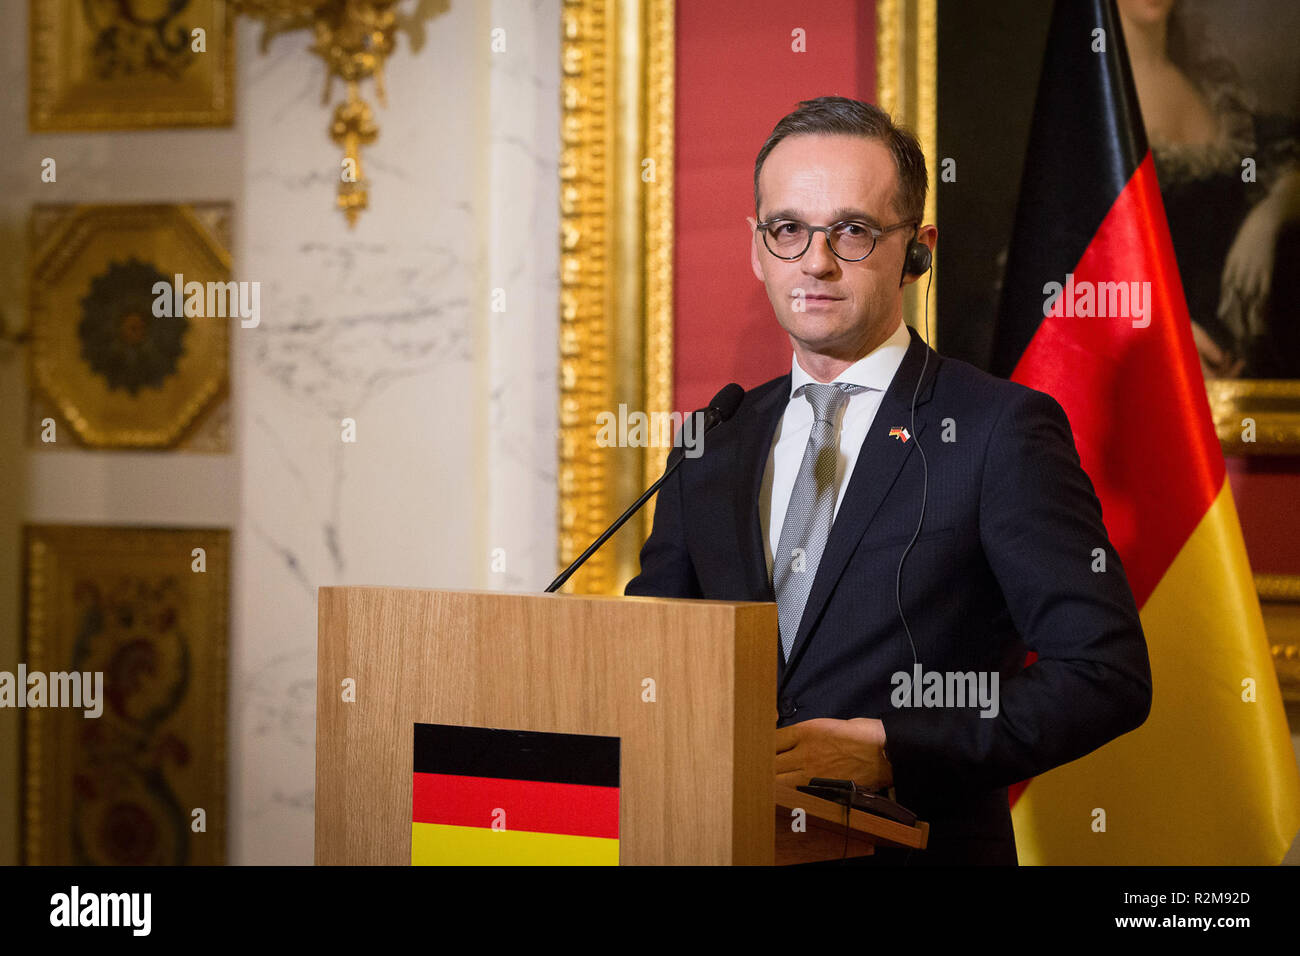 German Minister of Foreign Affairs Heiko Maas during the press conference at Lazienki Palace in Warsaw, Poland on 16 March 2018 Stock Photo